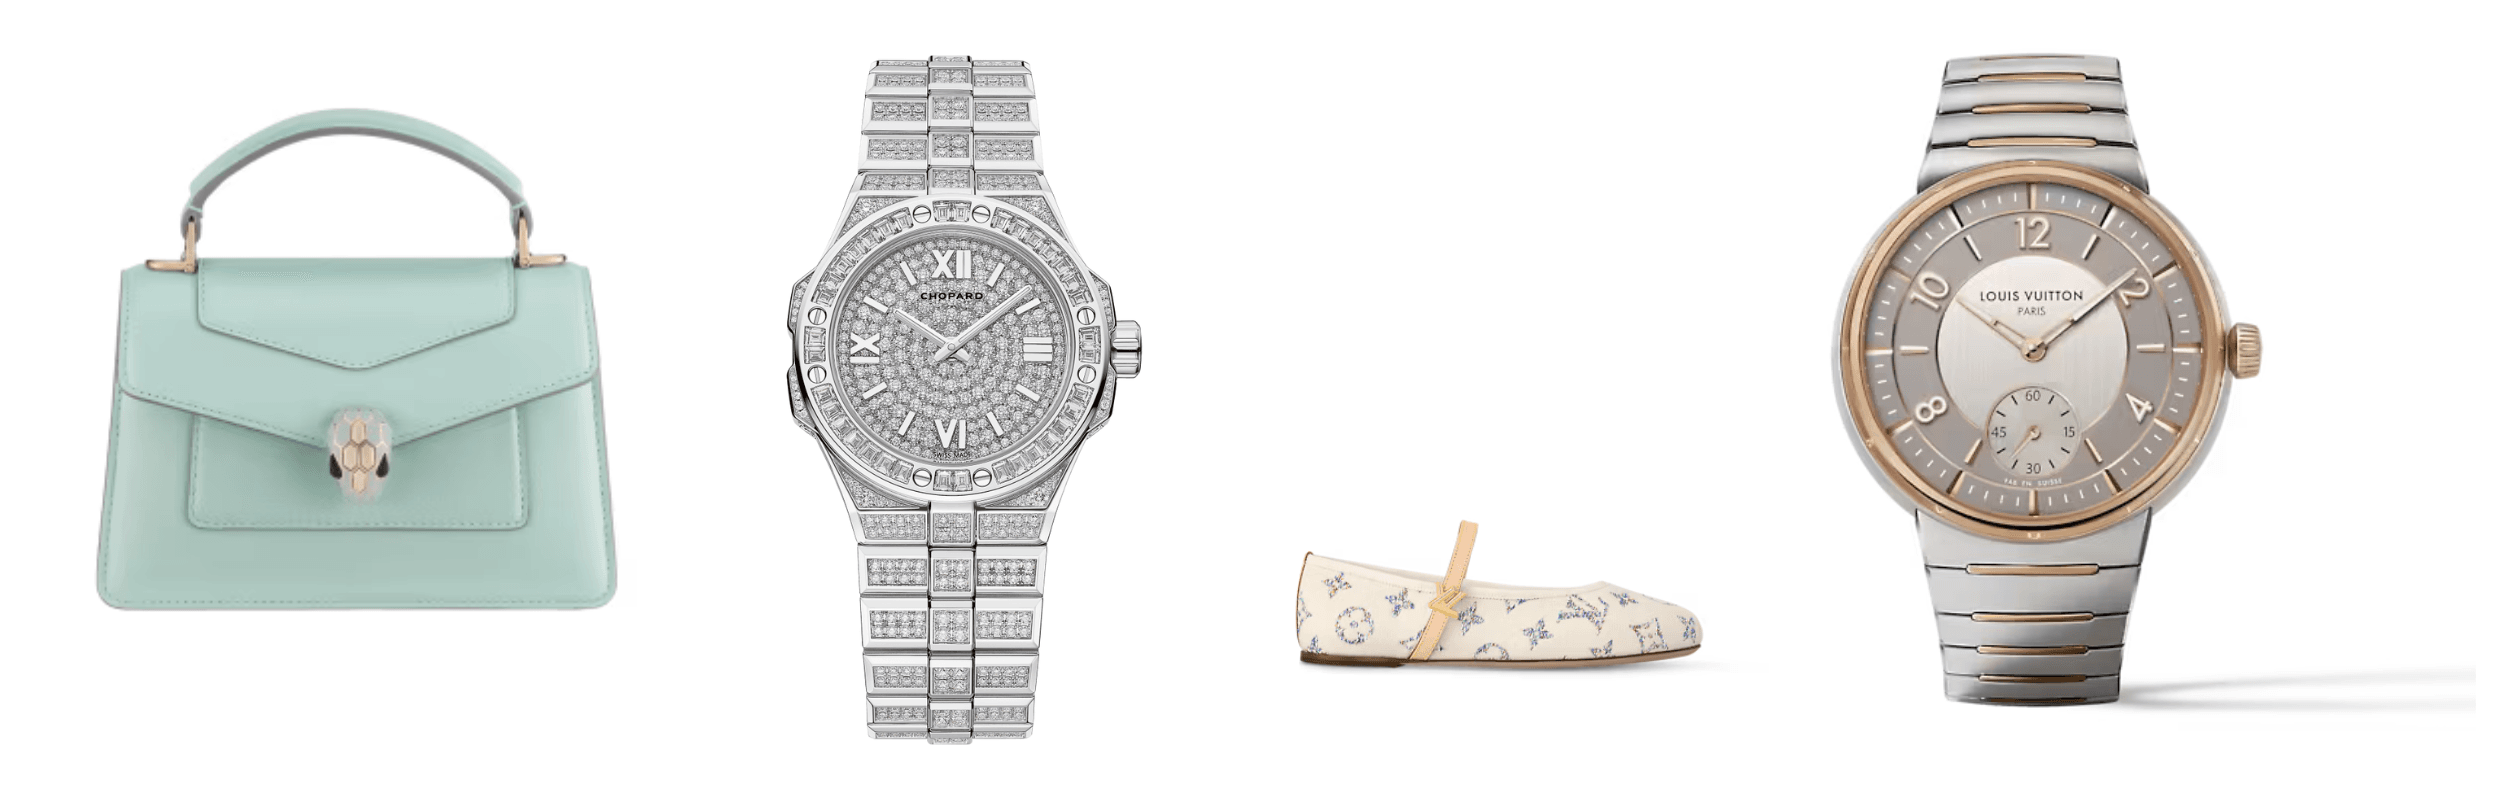 Still Wondering What to Get Your Mother This Mother’s Day? We Have The Perfect Gift Pairing Watch Guide For You